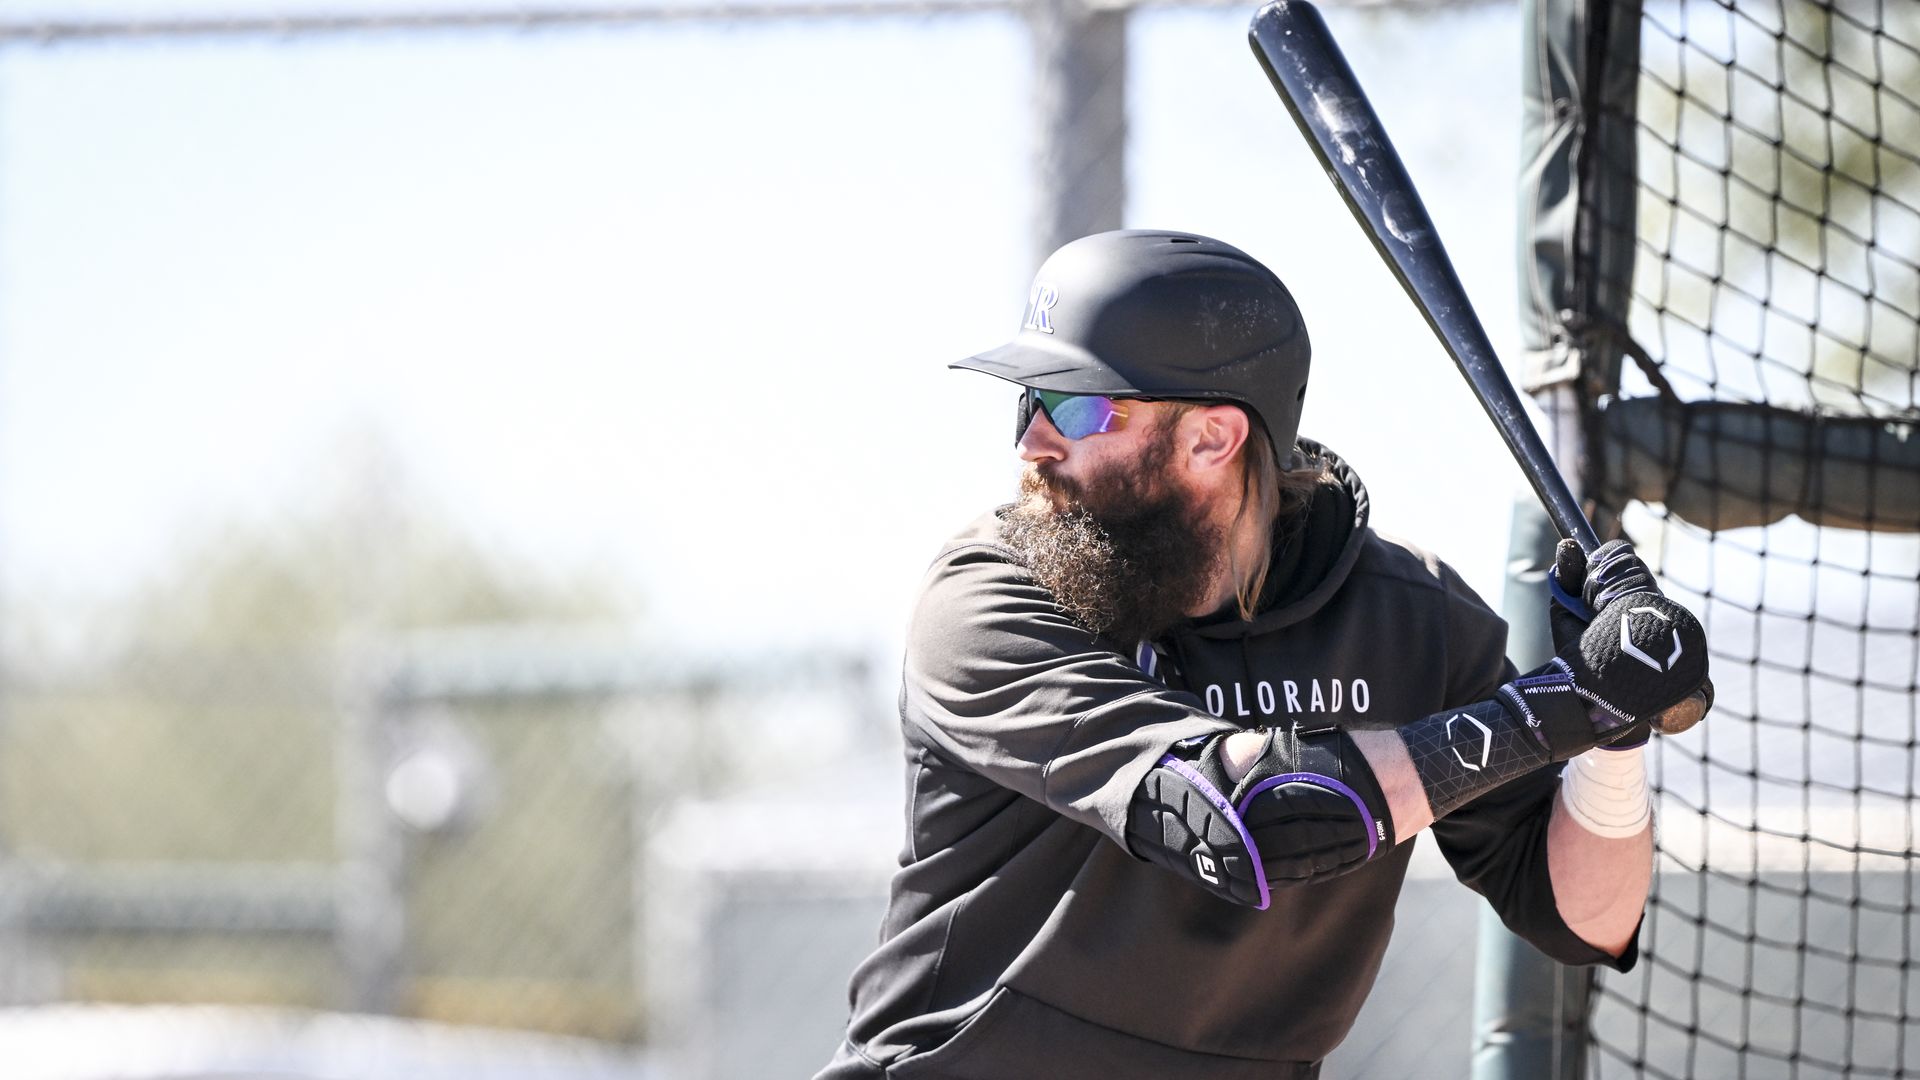 A photo of a Rockies baseball player with a long beard holding up his bat getting ready to swing.